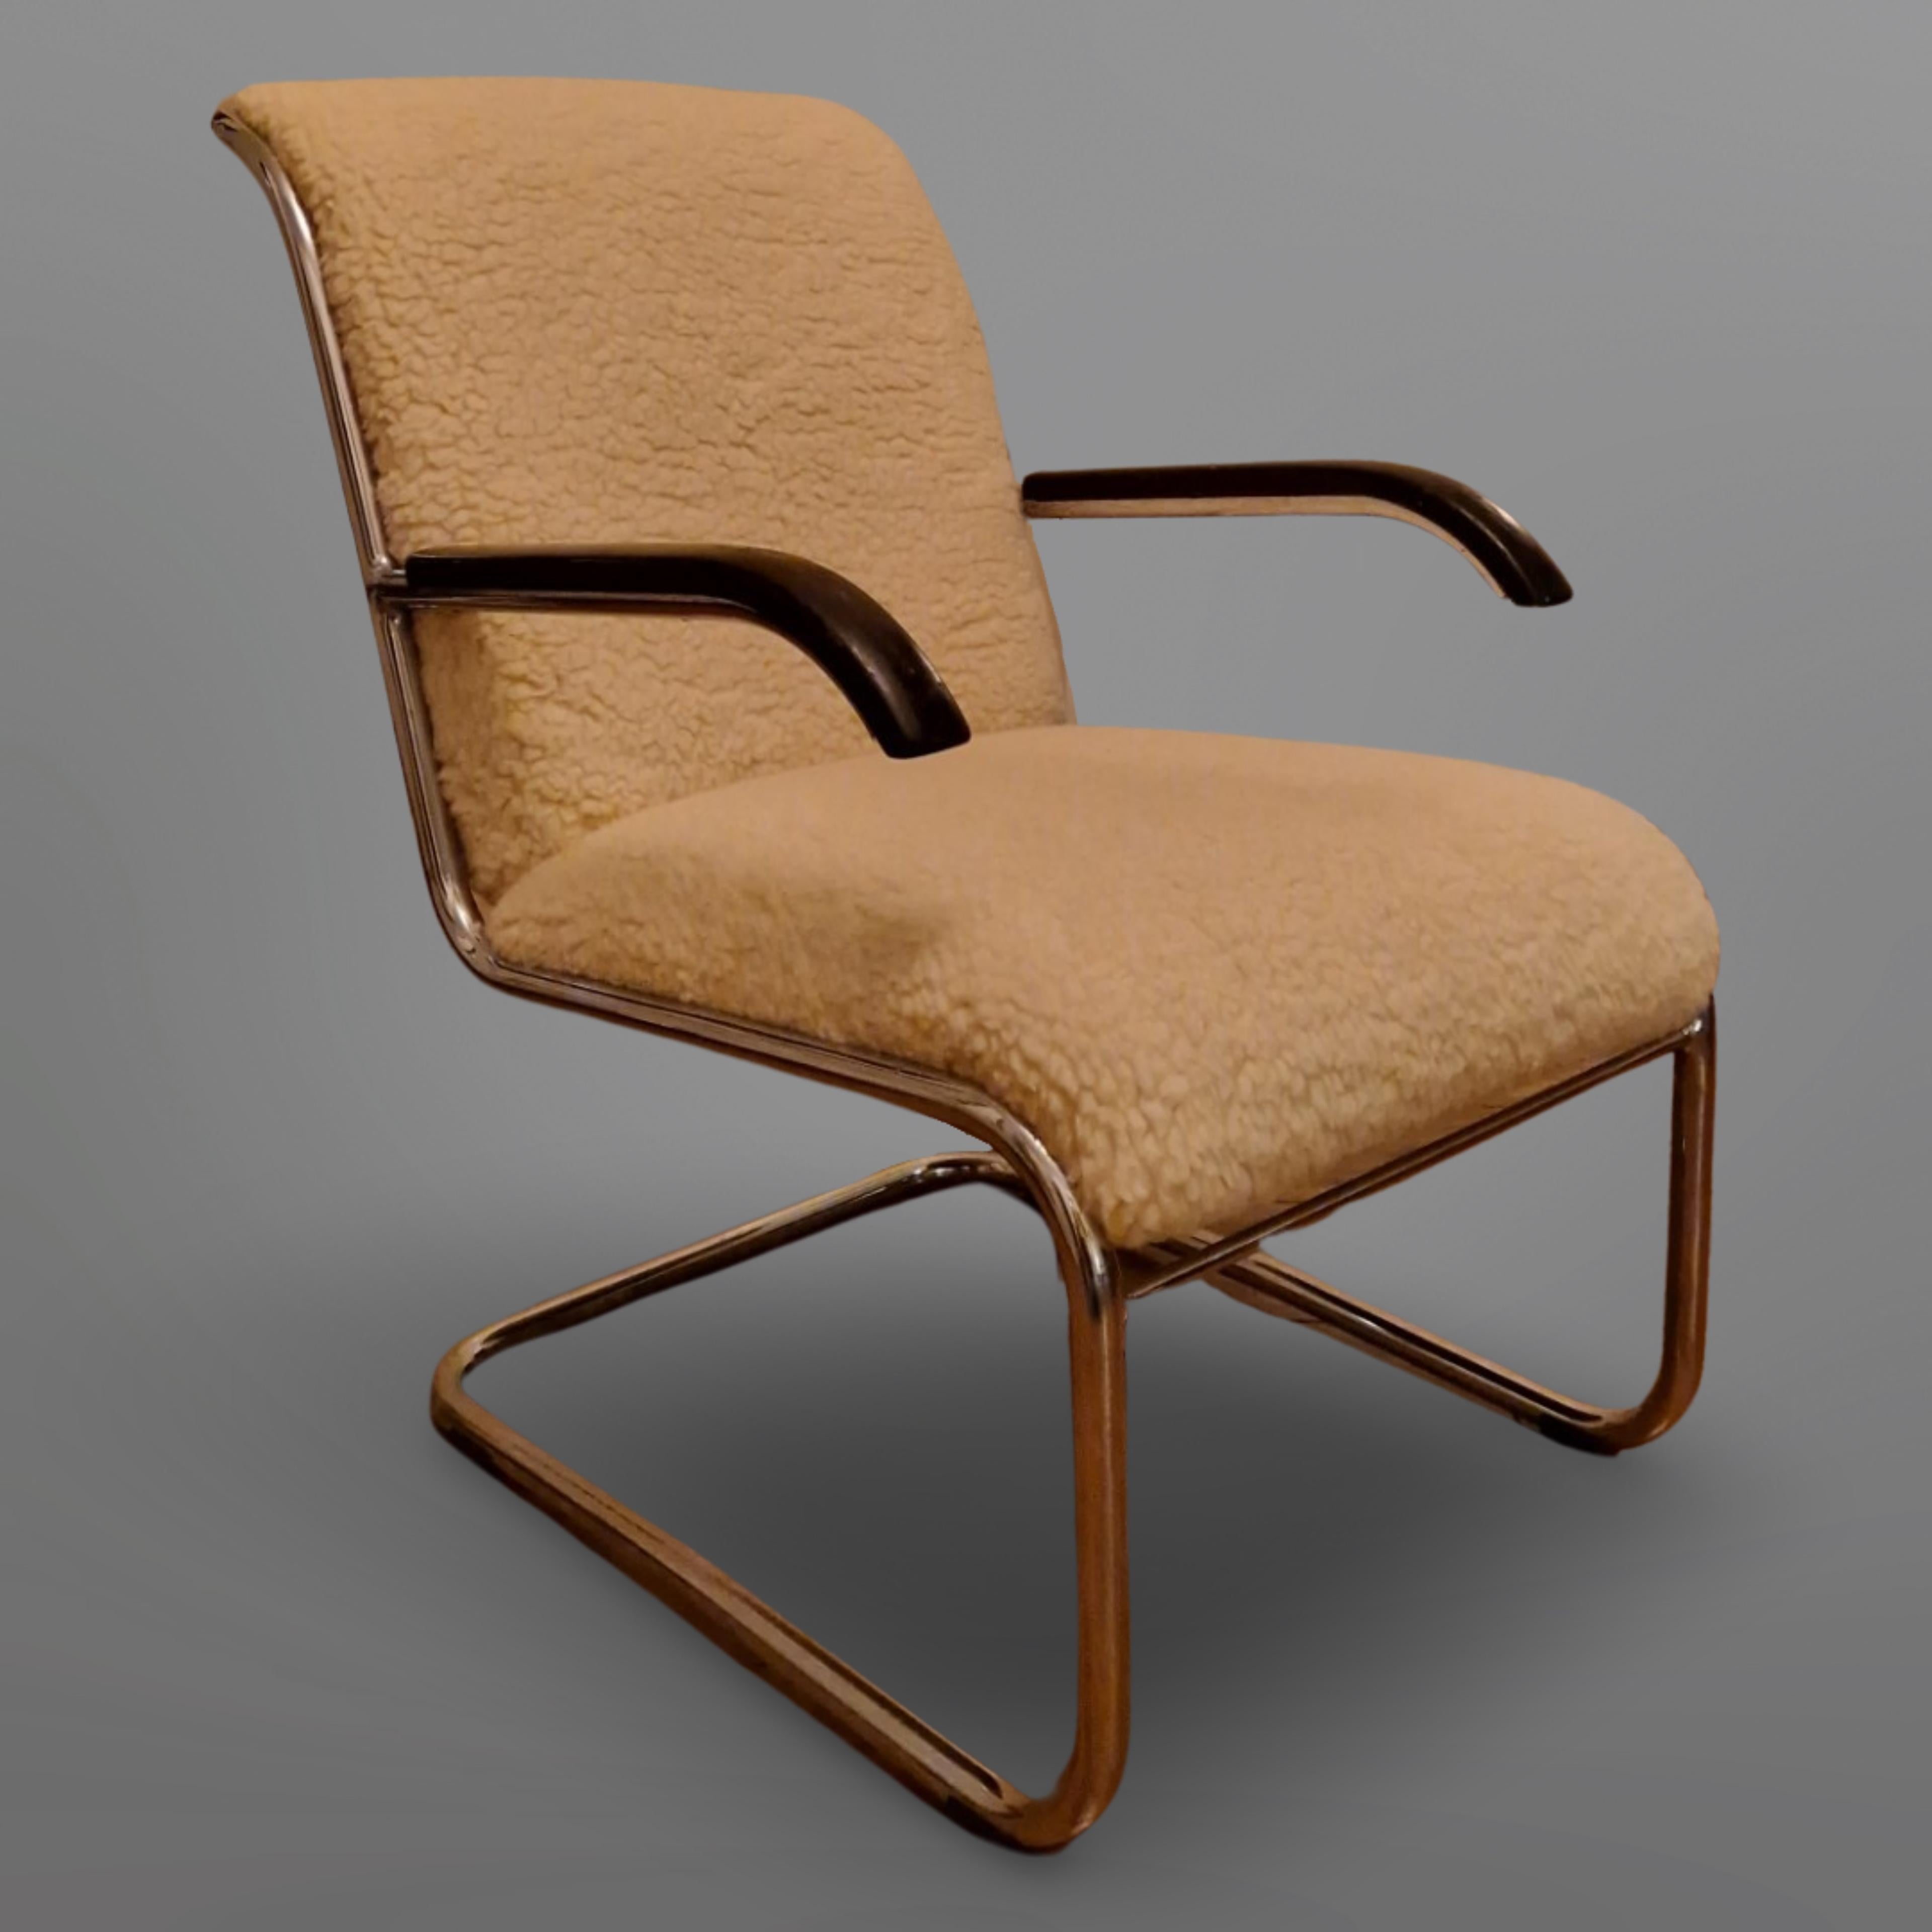 Dutch Bauhaus lounge chair with wool teddy upholstery, Netherlands 1930s